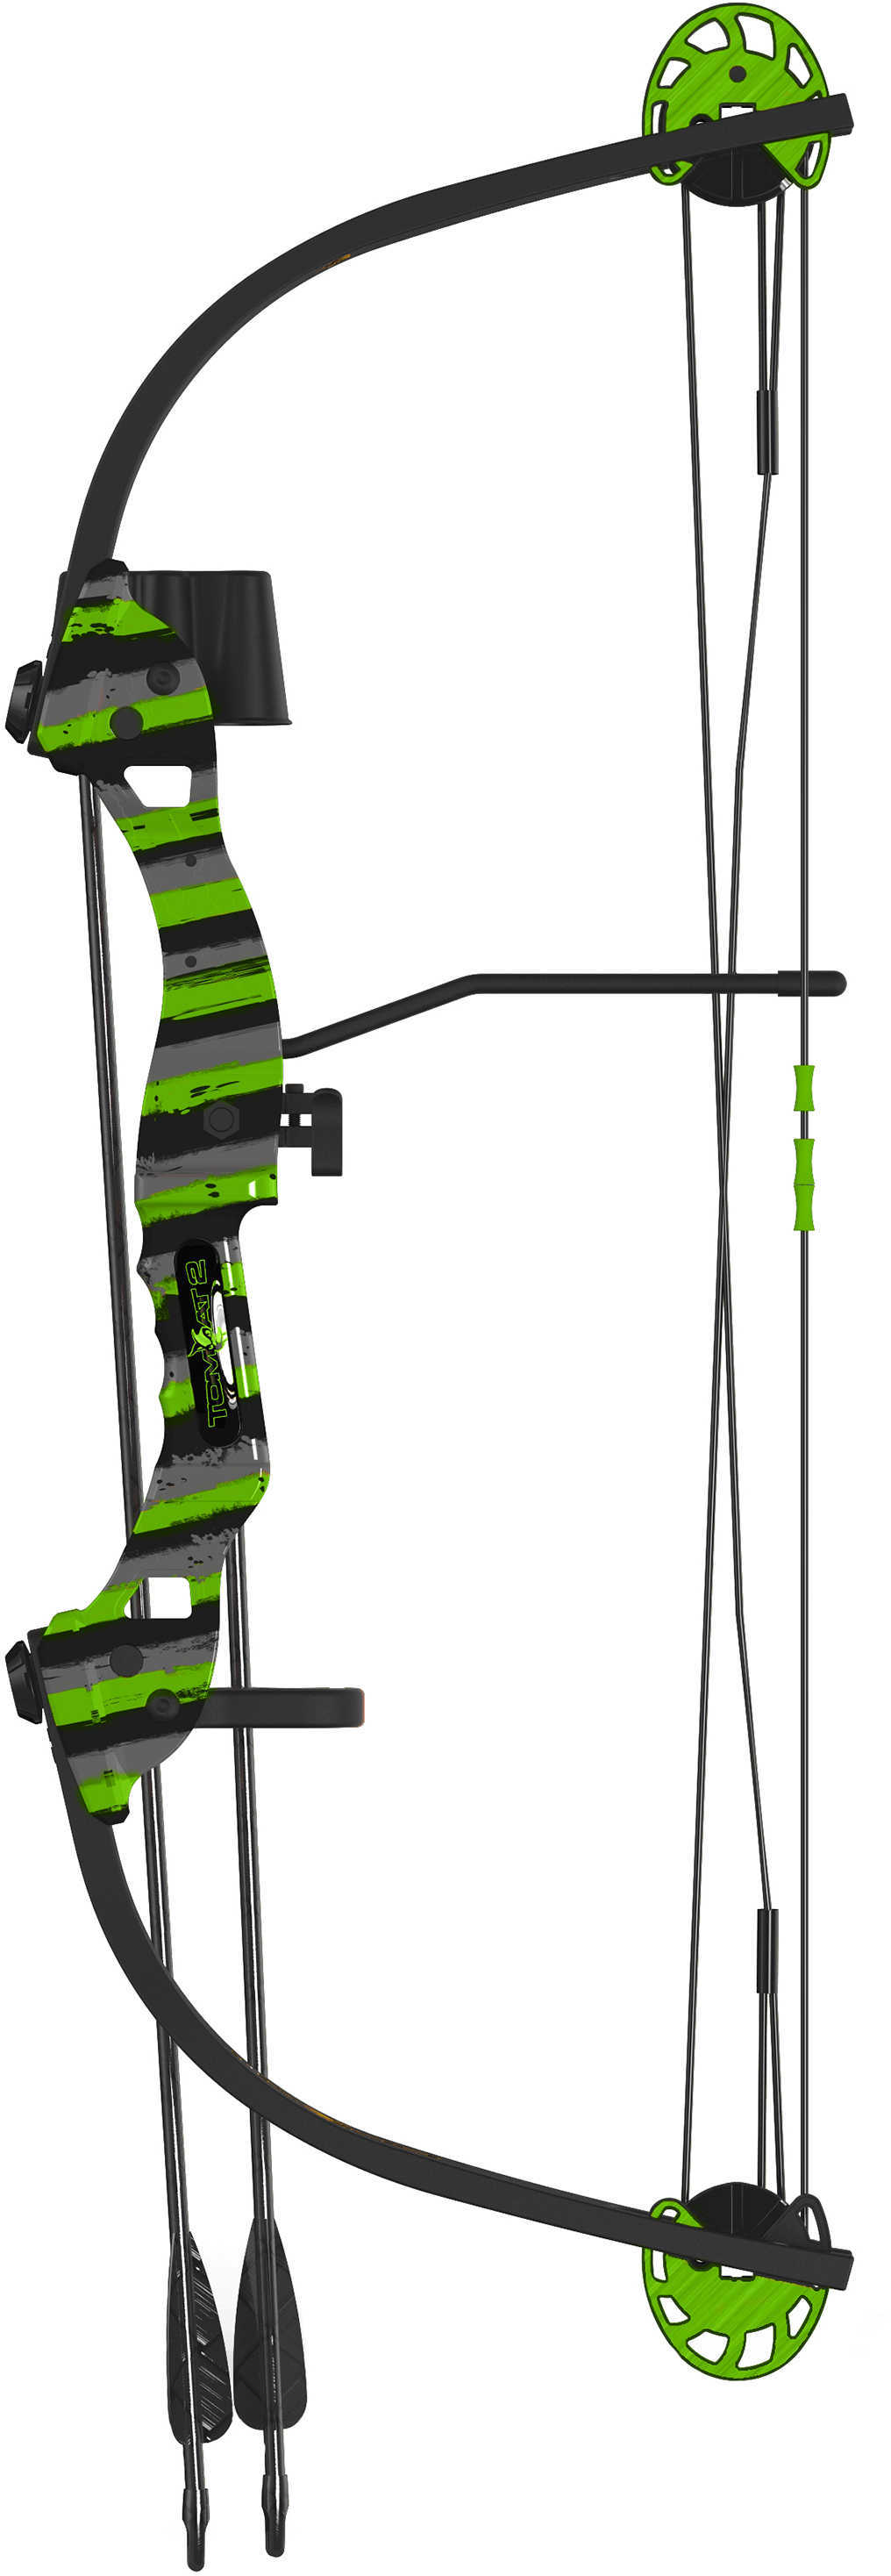 Barnett Youth Archery Tomcat 2 Compound Bow Green with Black Accents Md: 1278